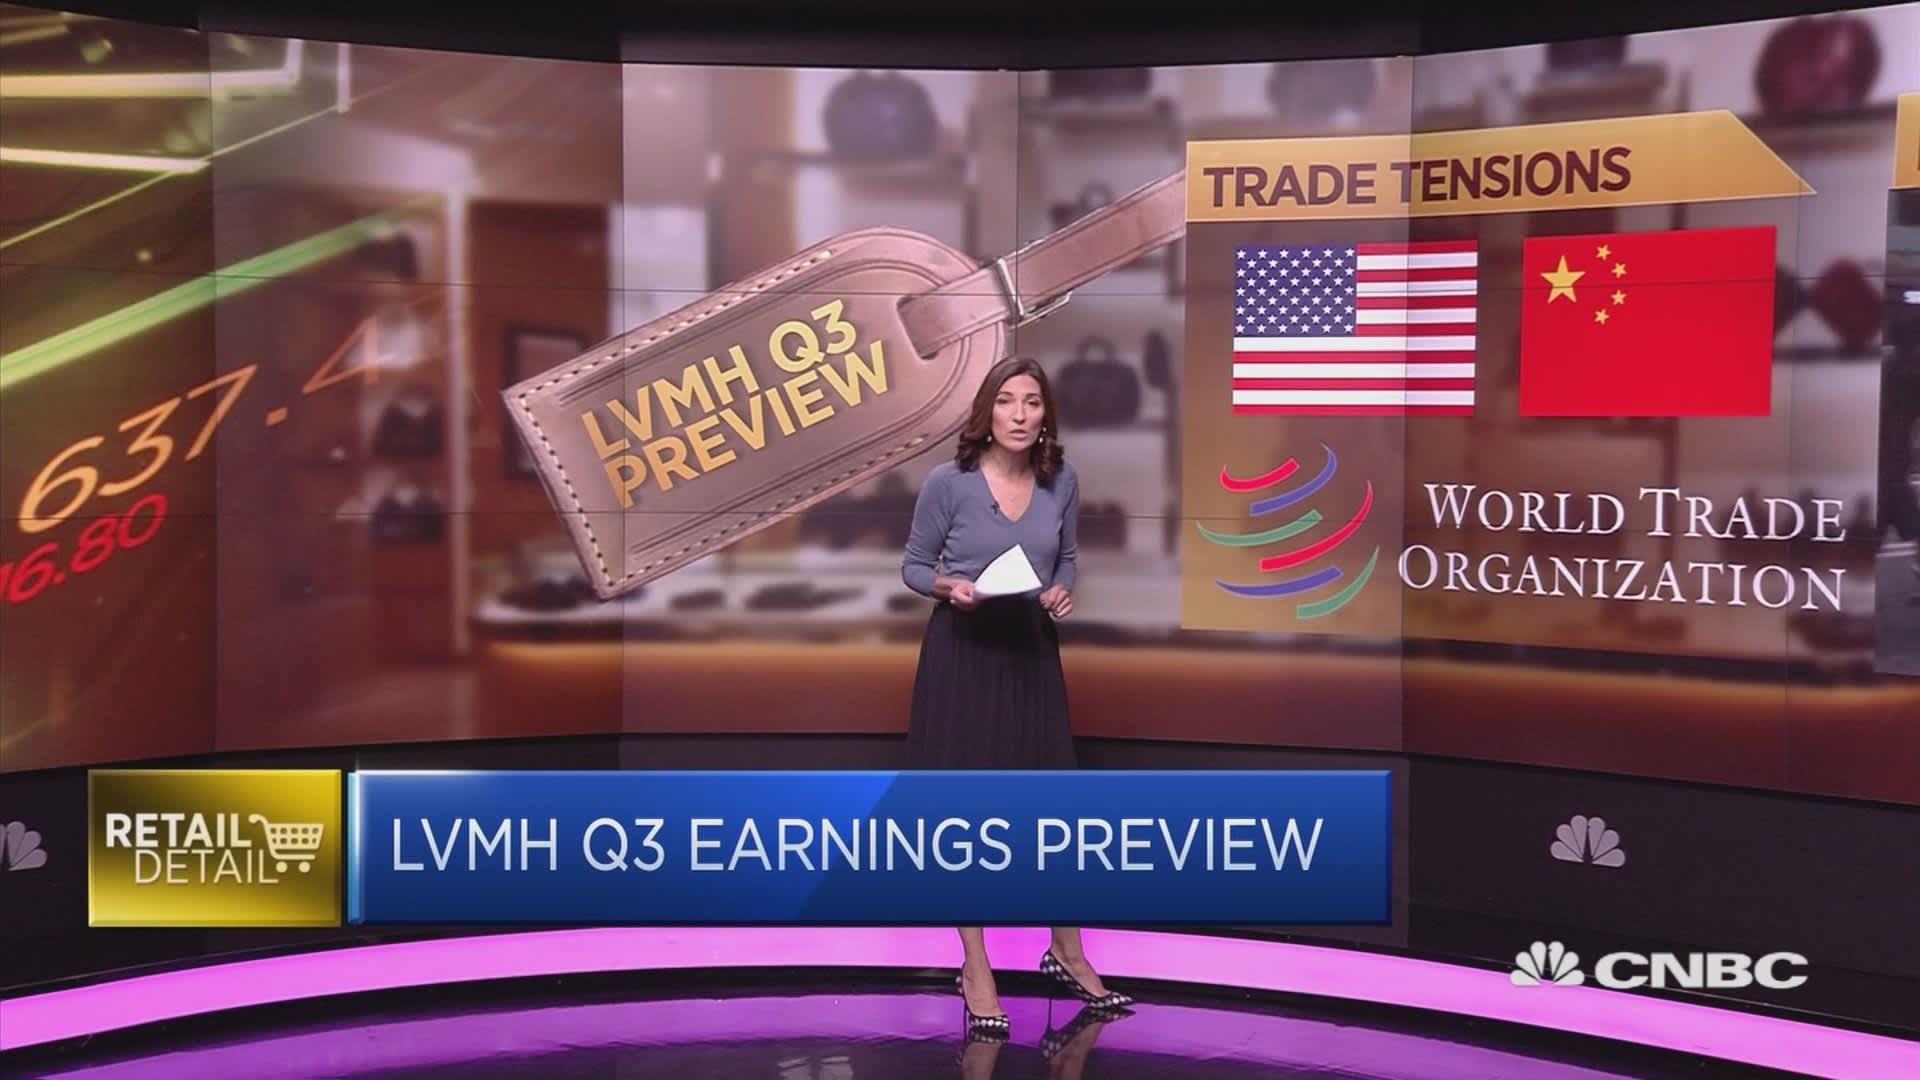 Here's what to watch for in LVMH's third quarter earnings